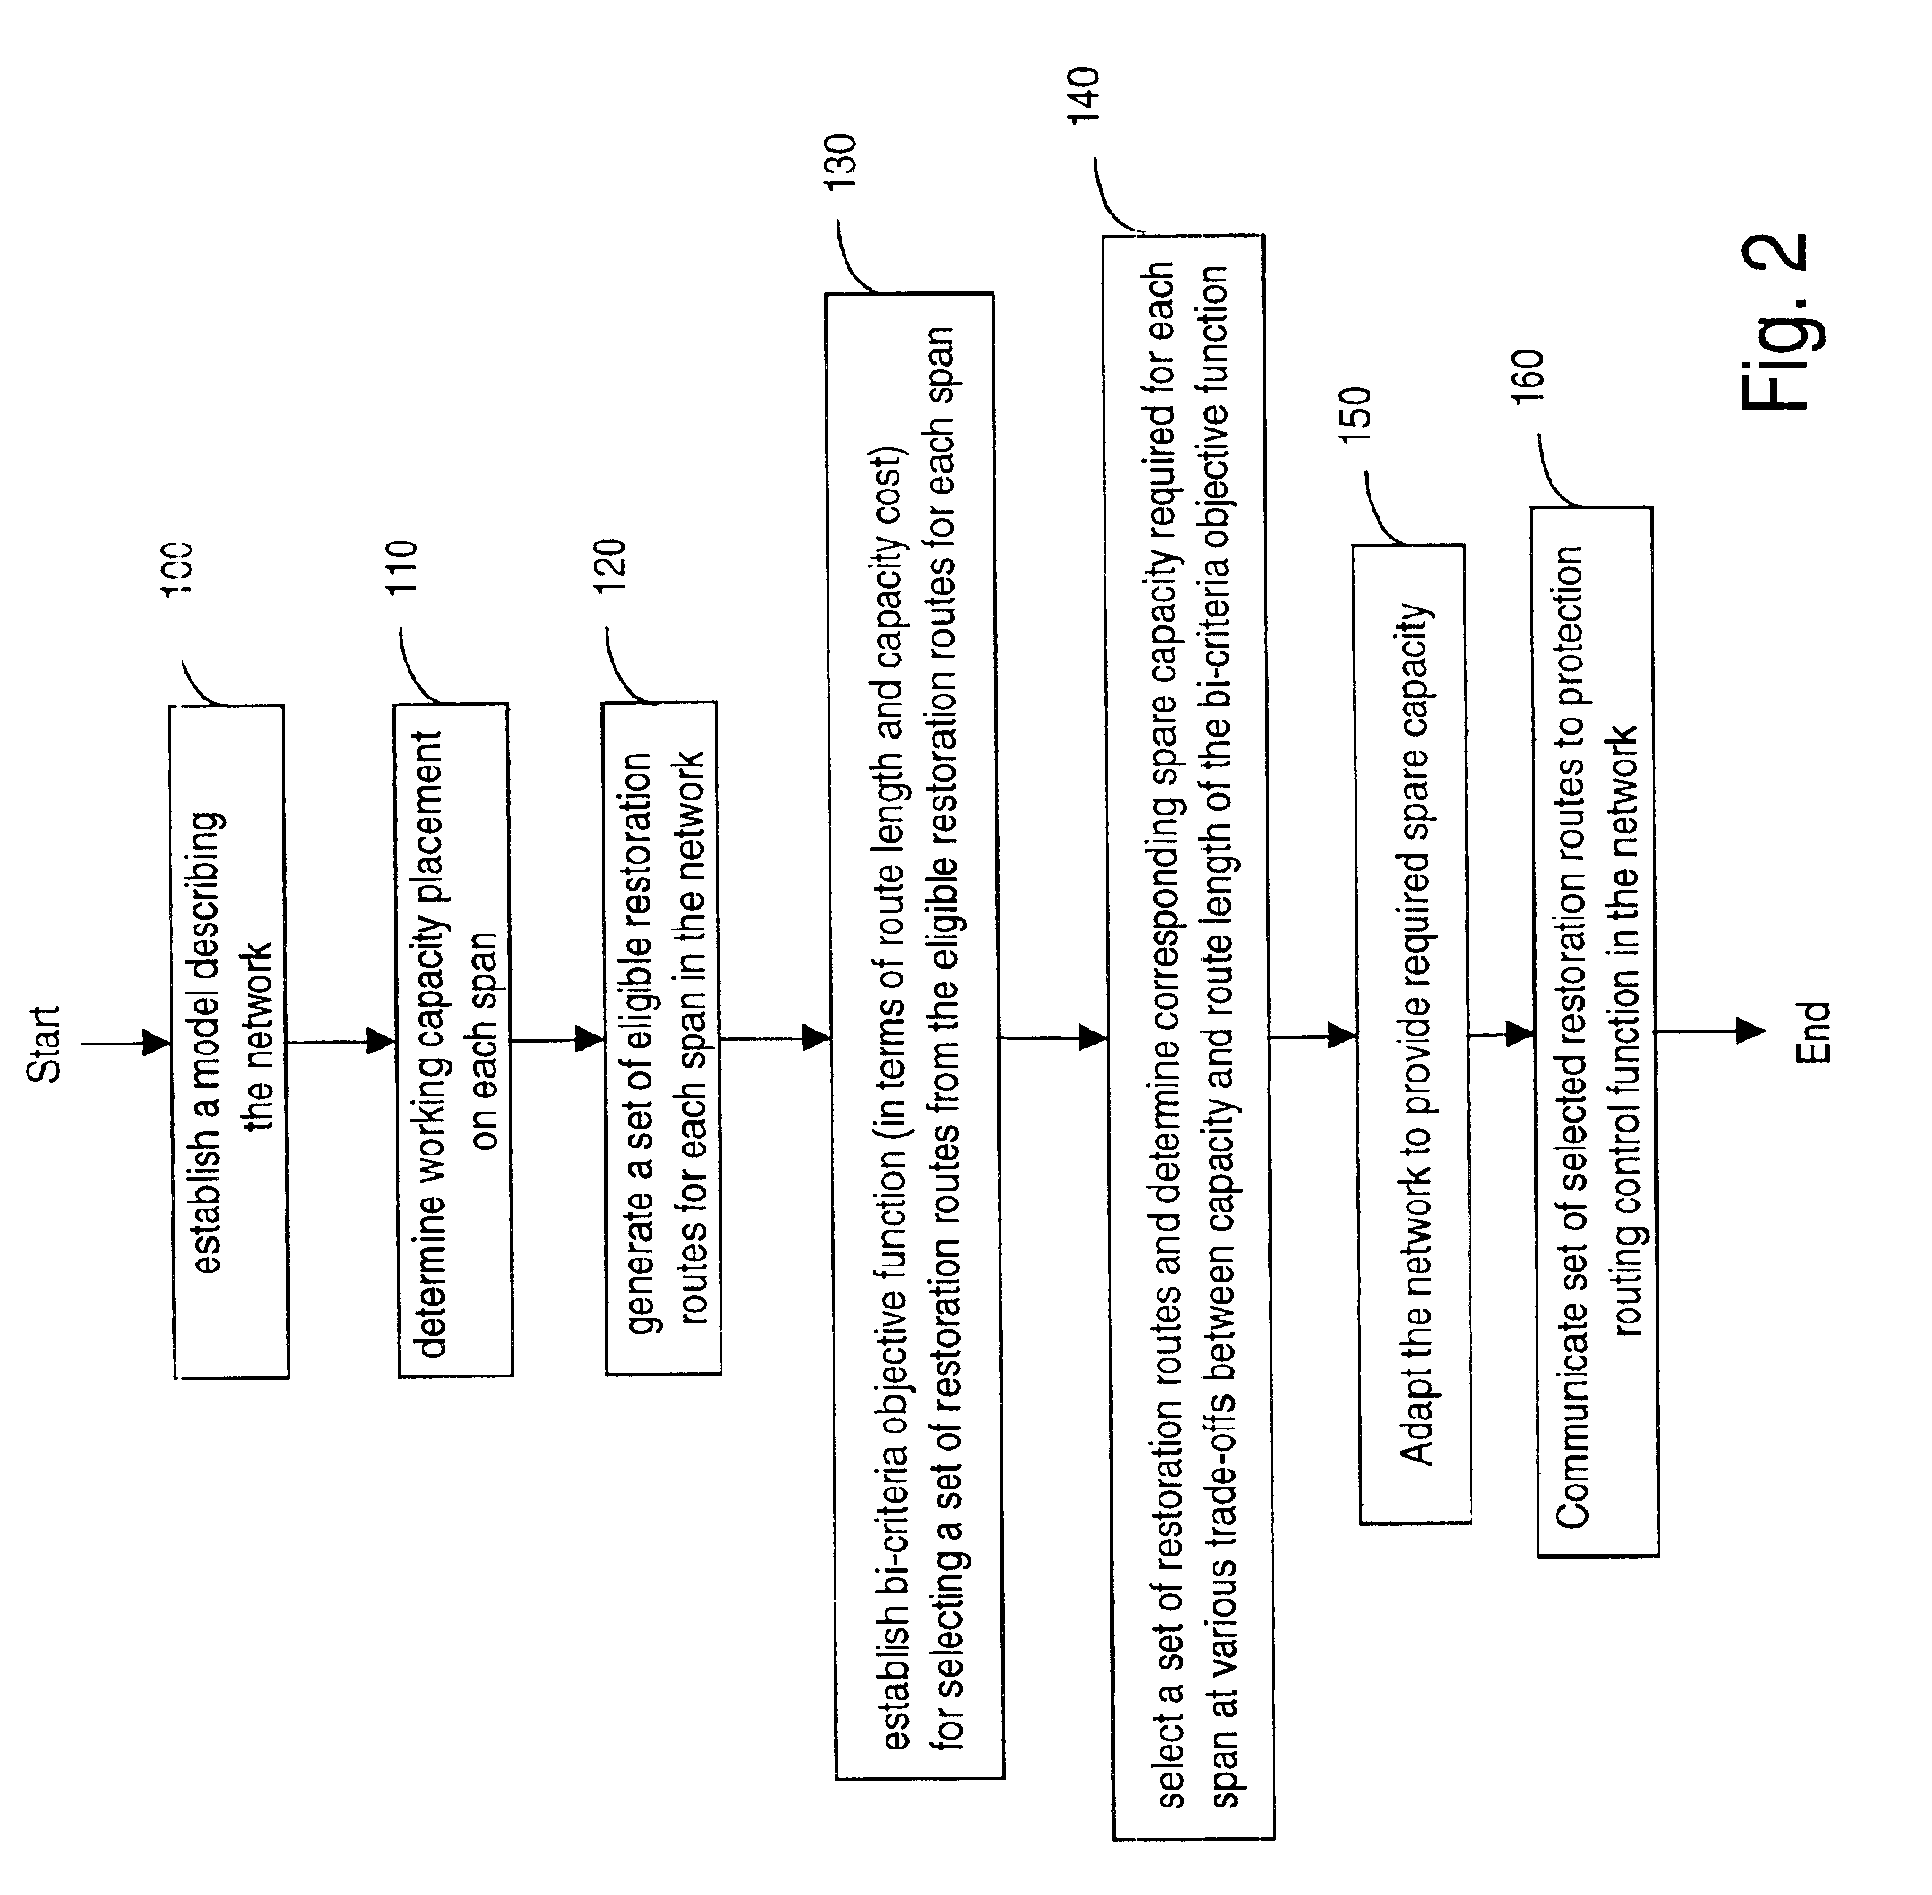 Method of providing restoration routes in a mesh network